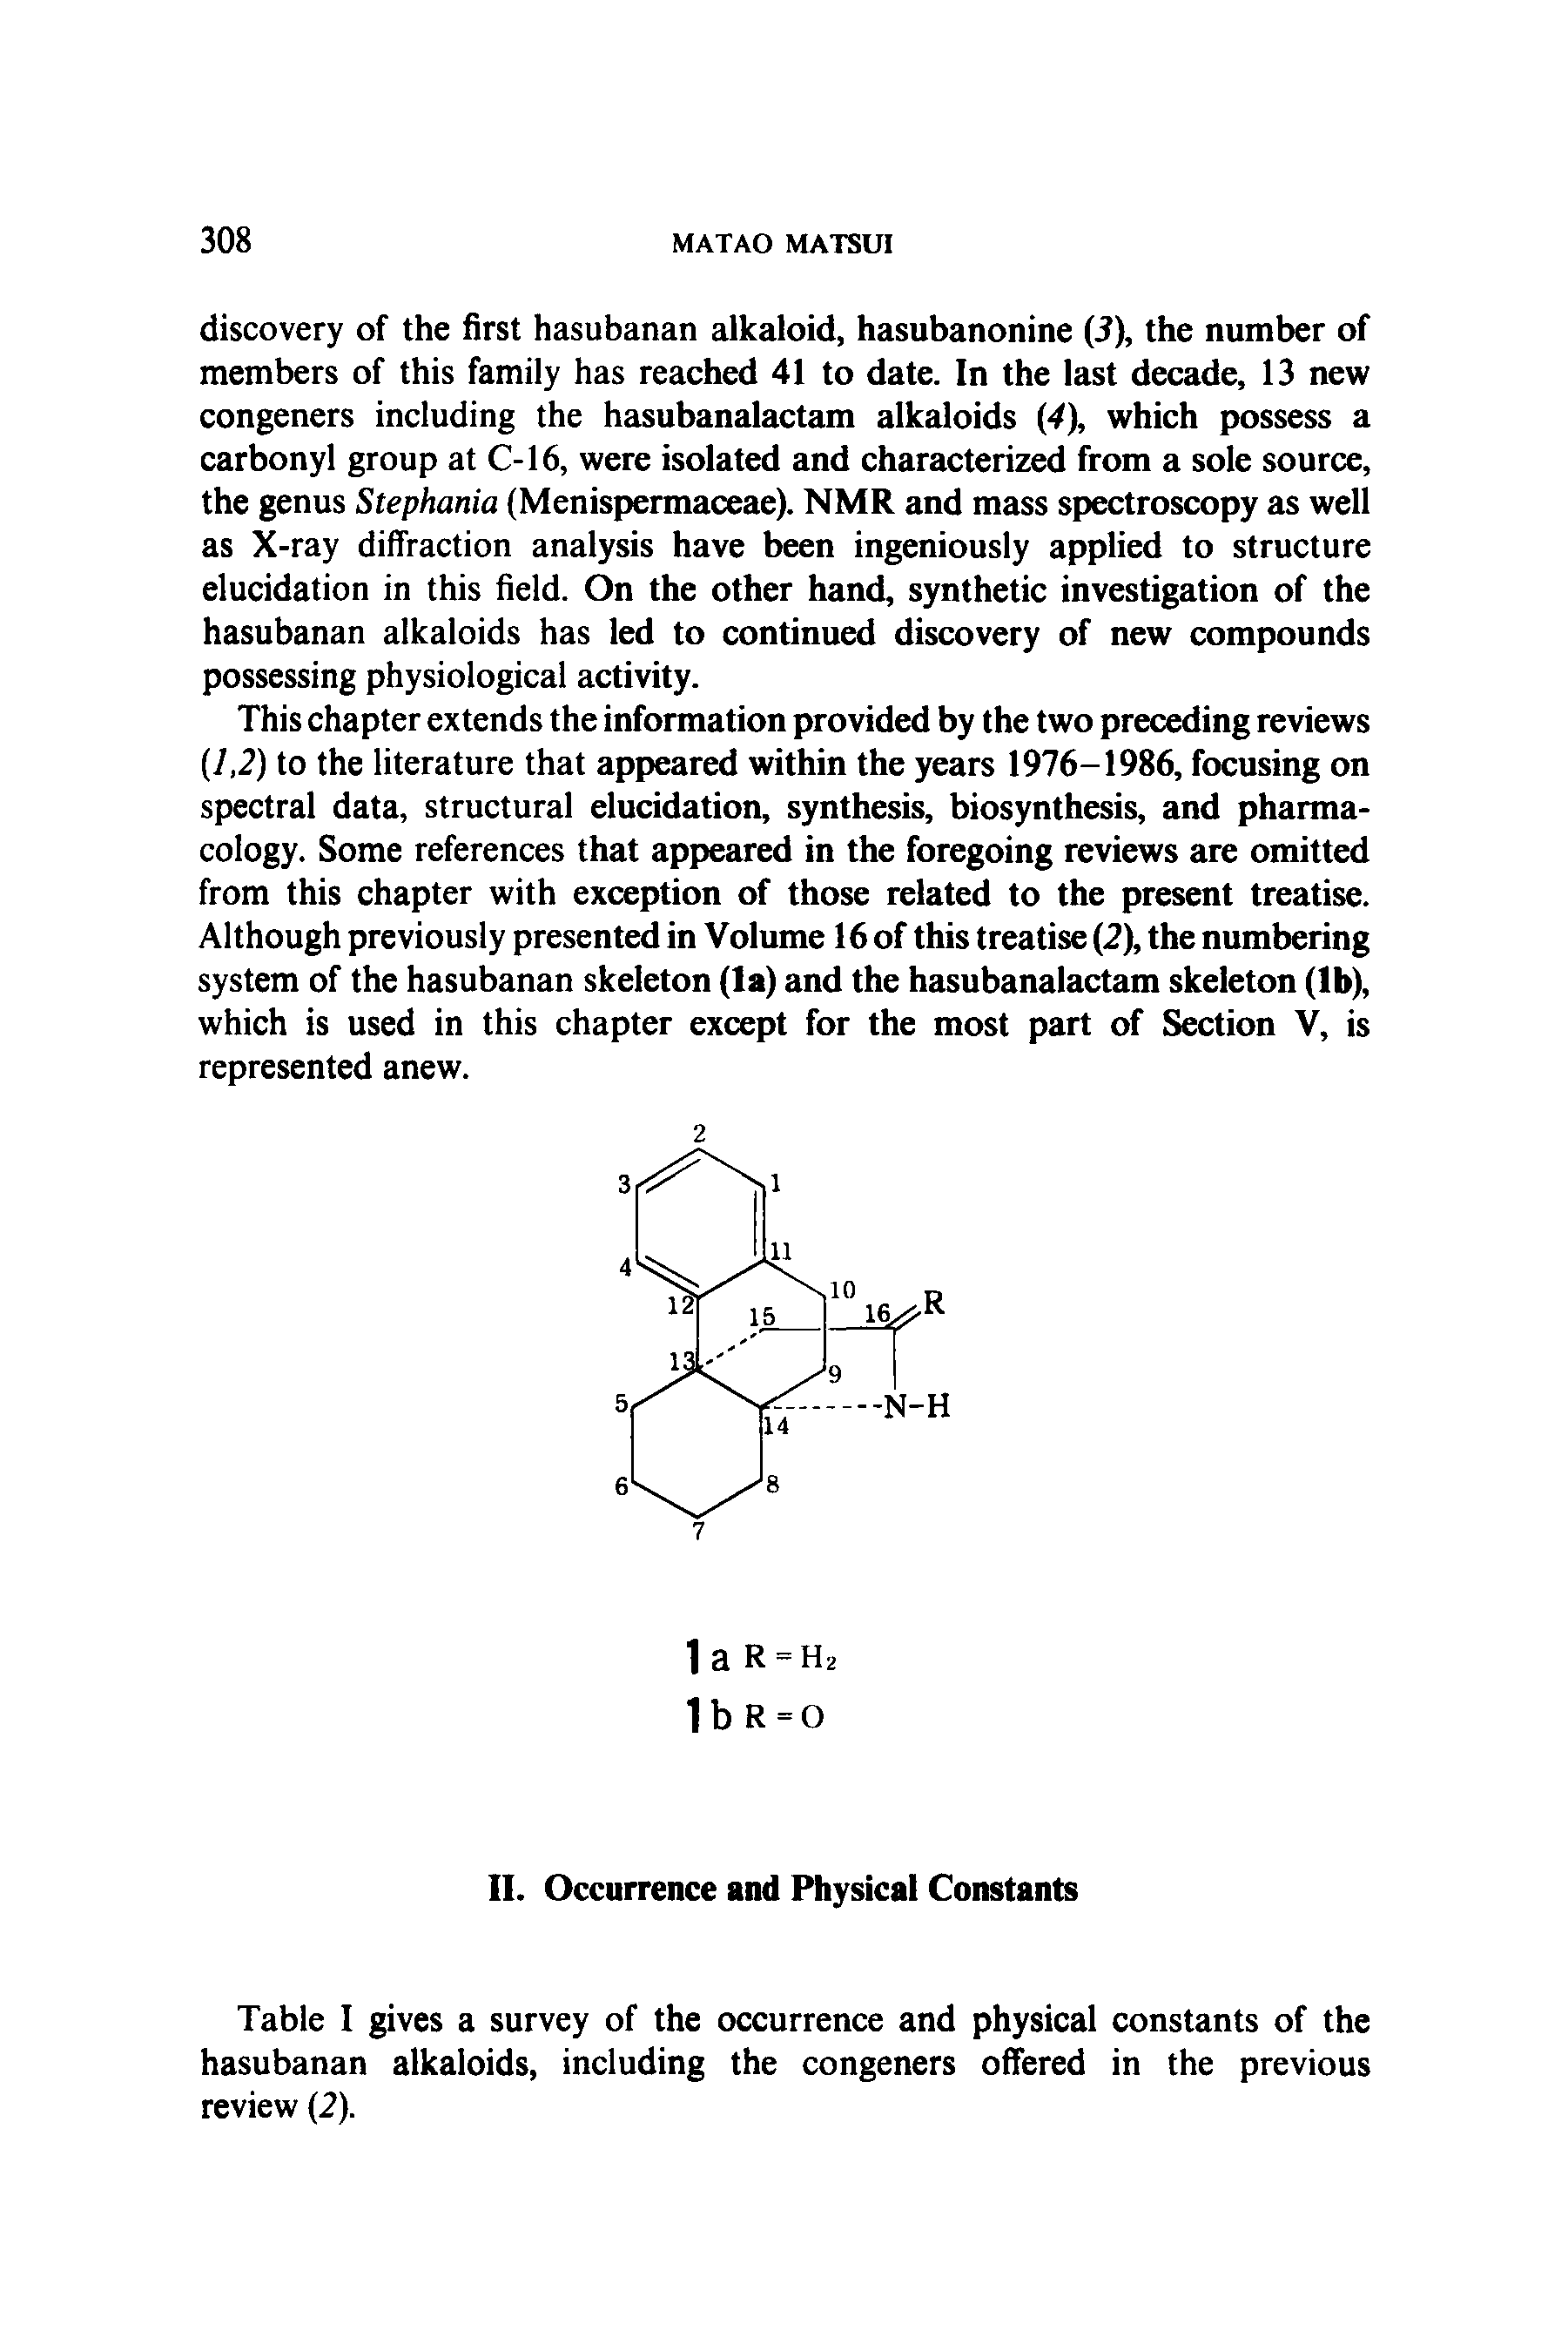 Table I gives a survey of the occurrence and physical constants of the hasubanan alkaloids, including the congeners offered in the previous review (2).